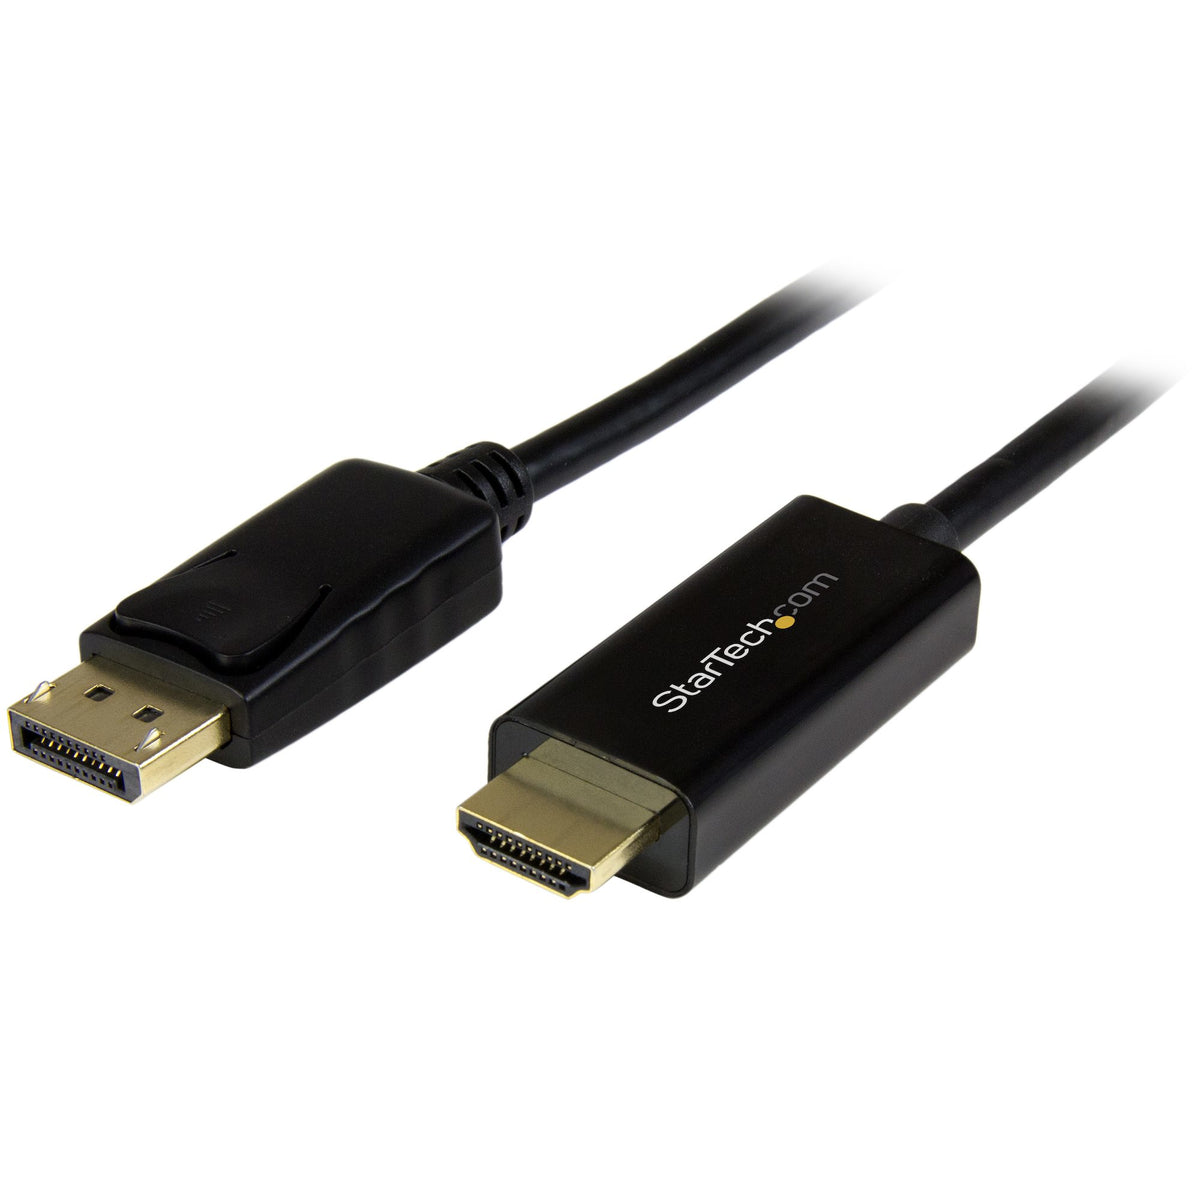 StarTech.com 6ft (2m) DisplayPort to HDMI Cable - 4K 30Hz - DisplayPort to HDMI Adapter Cable - DP 1.2 to HDMI Monitor Cable Converter - Latching DP Connector - Passive DP to HDMI Cord